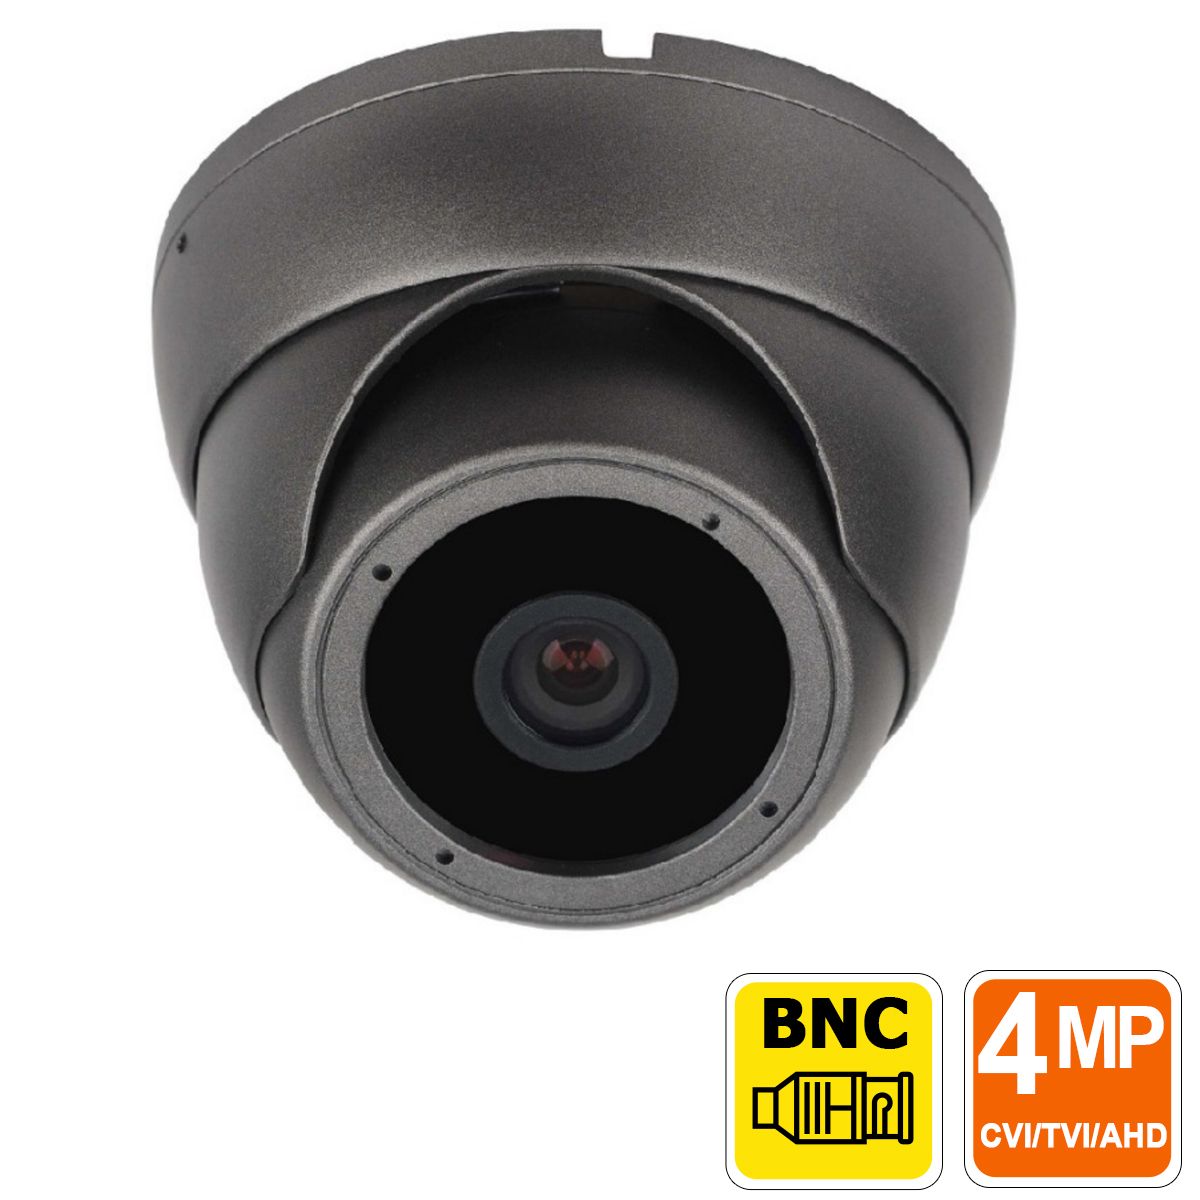 Best Security Camera Deals - Compare Low Sale Prices